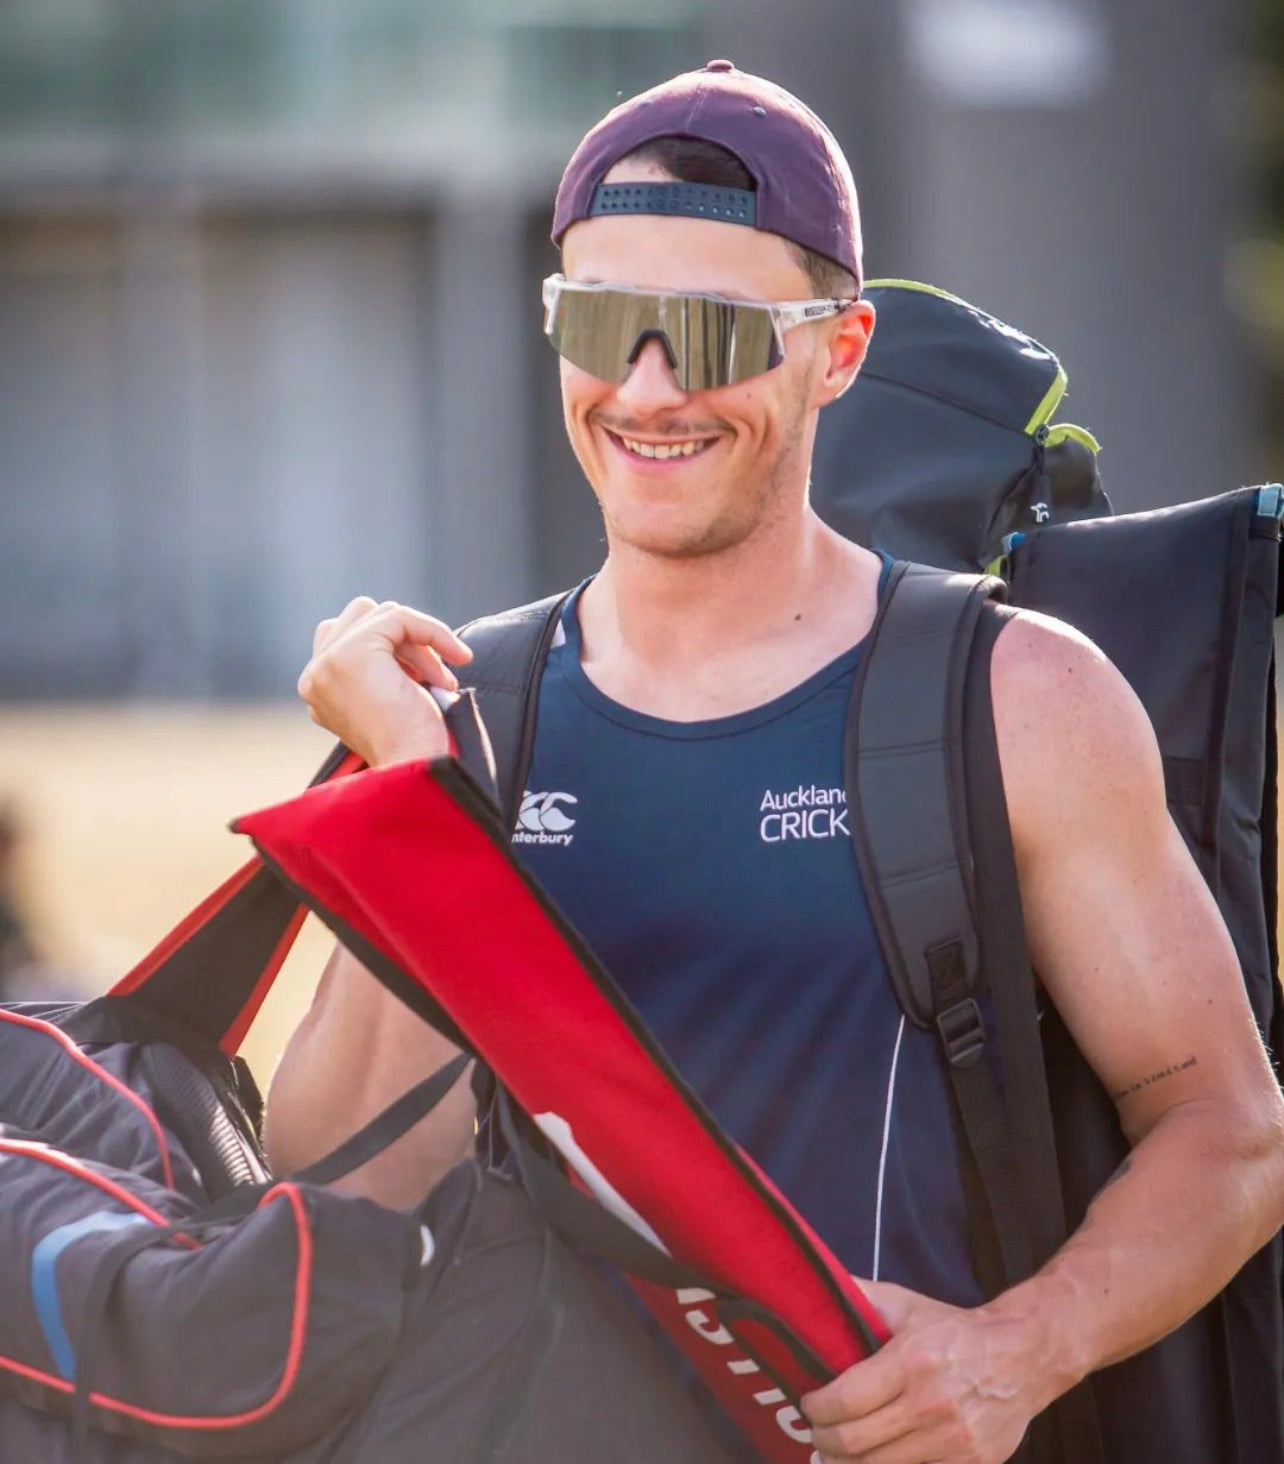 Sportsperson wearing Extend Sunglasses on their way to training